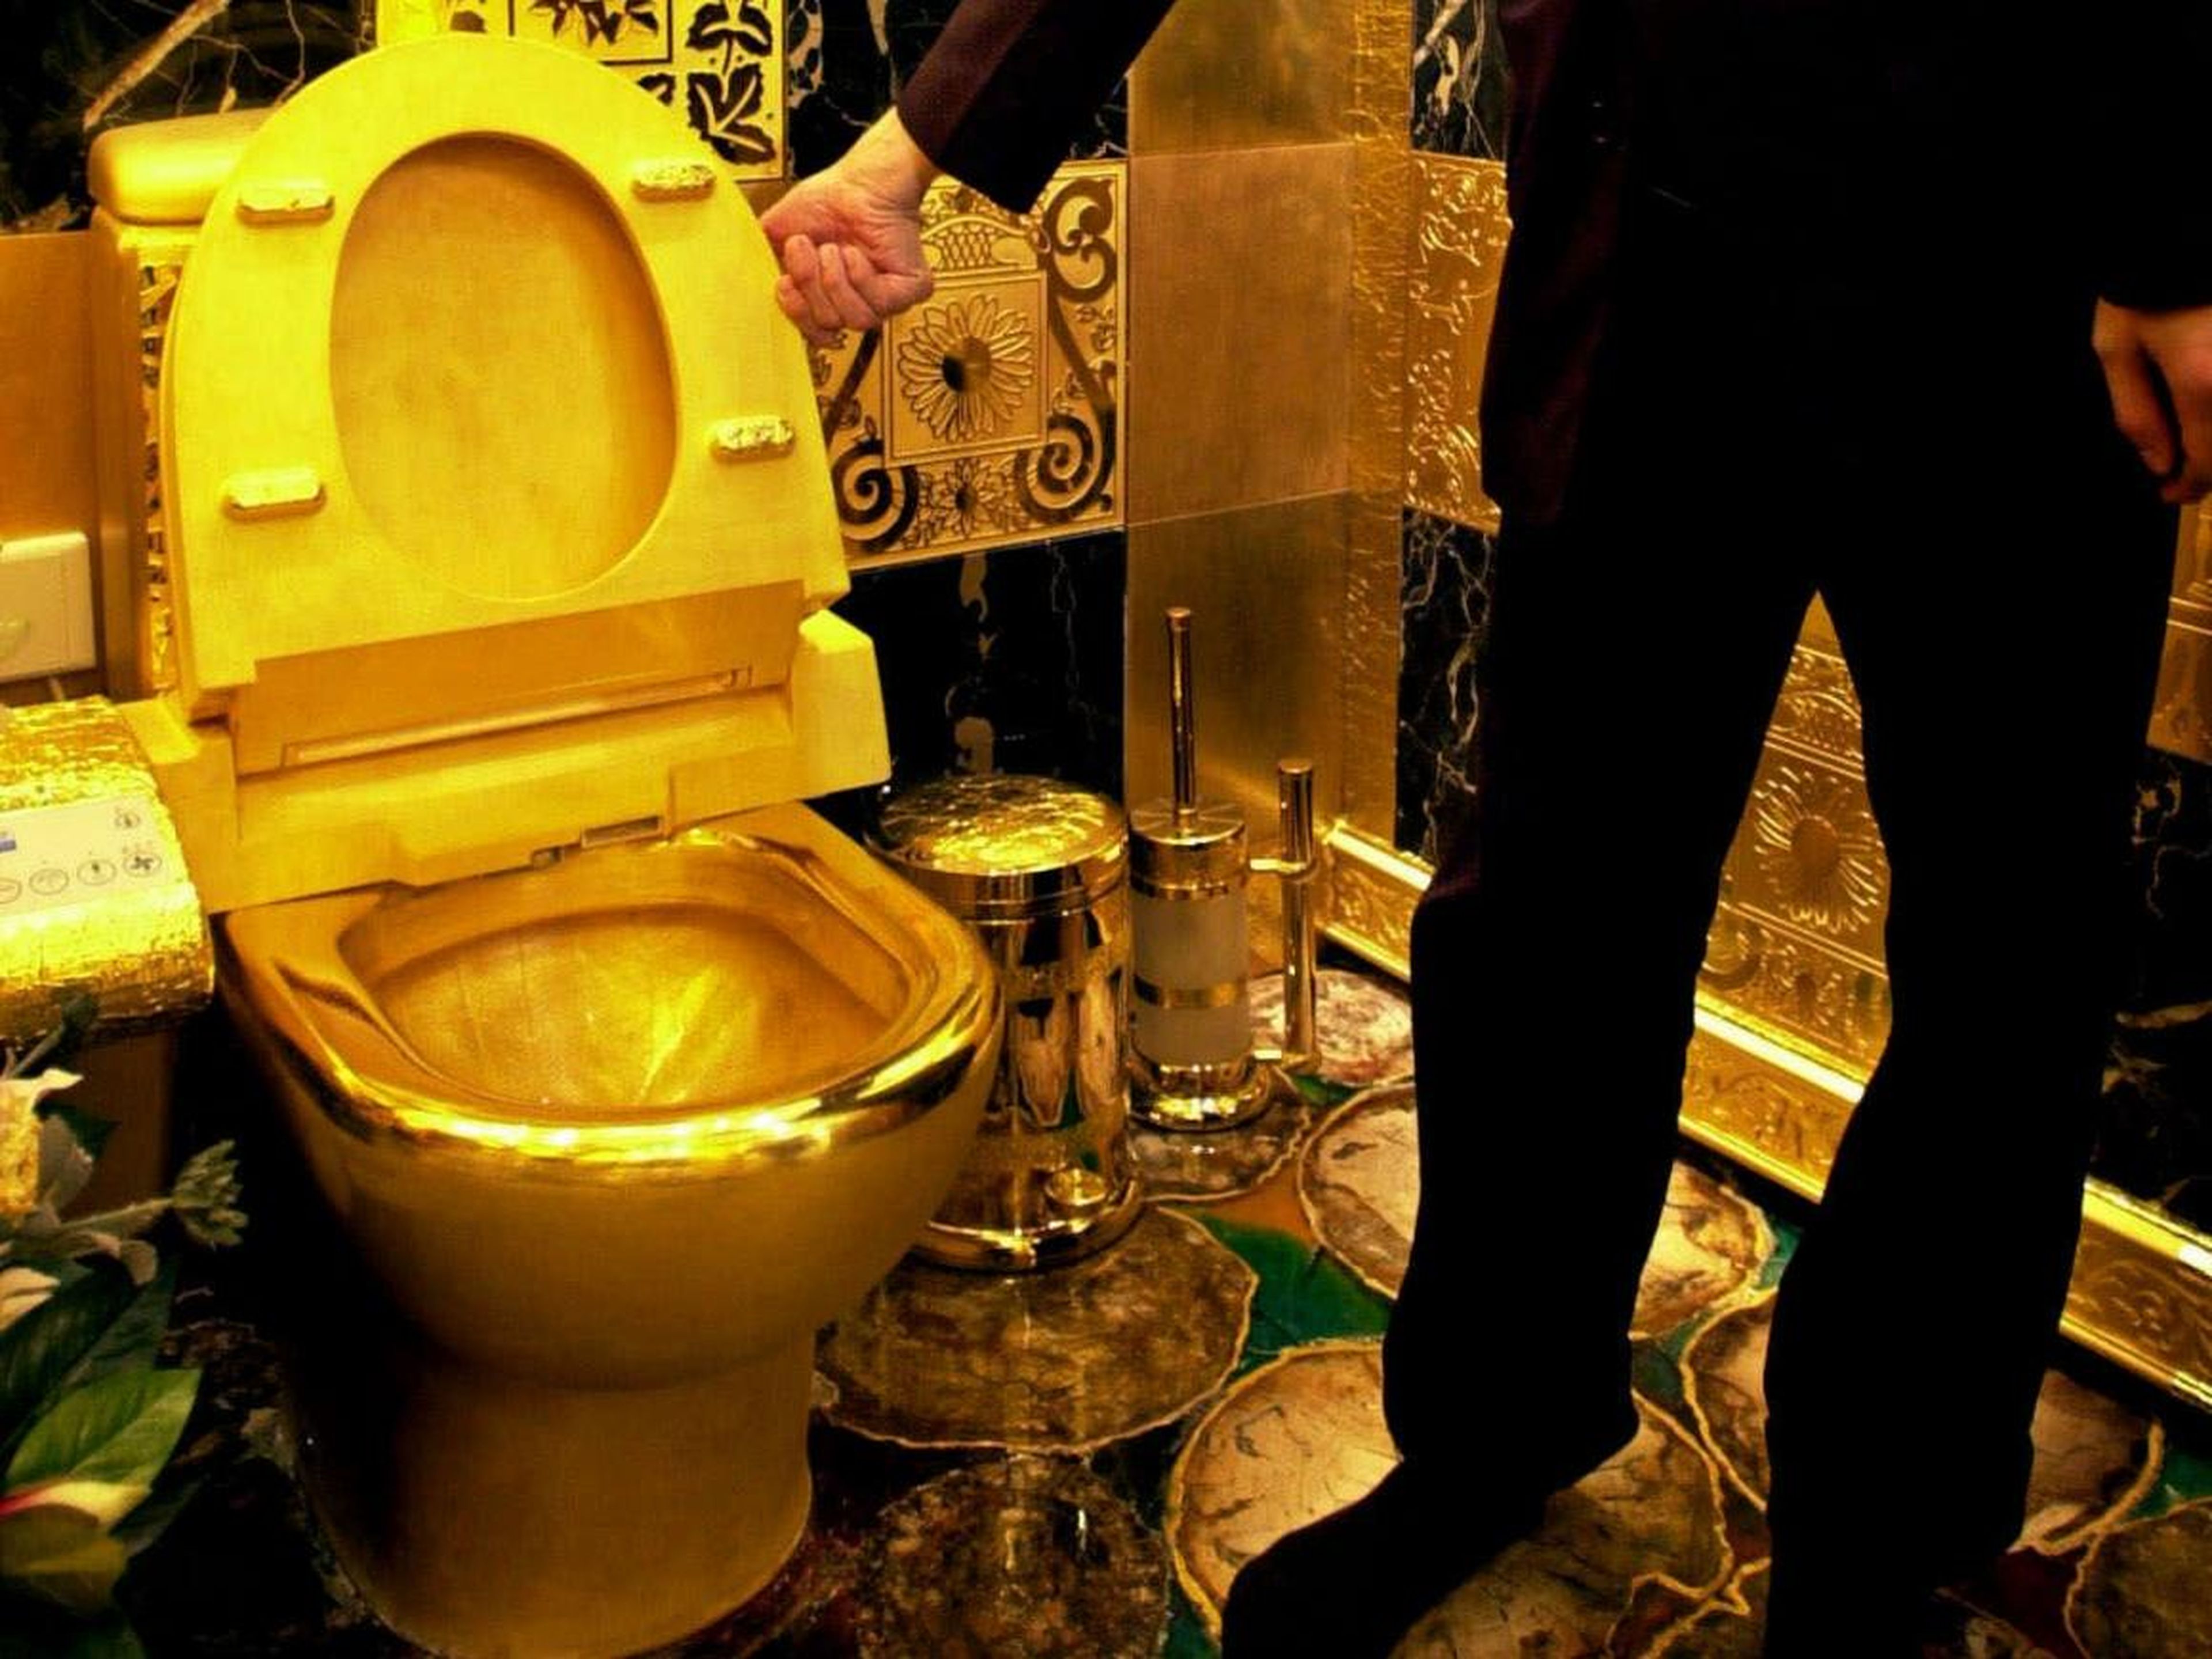 One way to show that you're ultra-wealthy is to surround yourself with as much gold as possible. A Hong Kong jeweler spent $3.5 million building a bathroom made entirely of gold and precious jewels, including a 24-carat solid gold